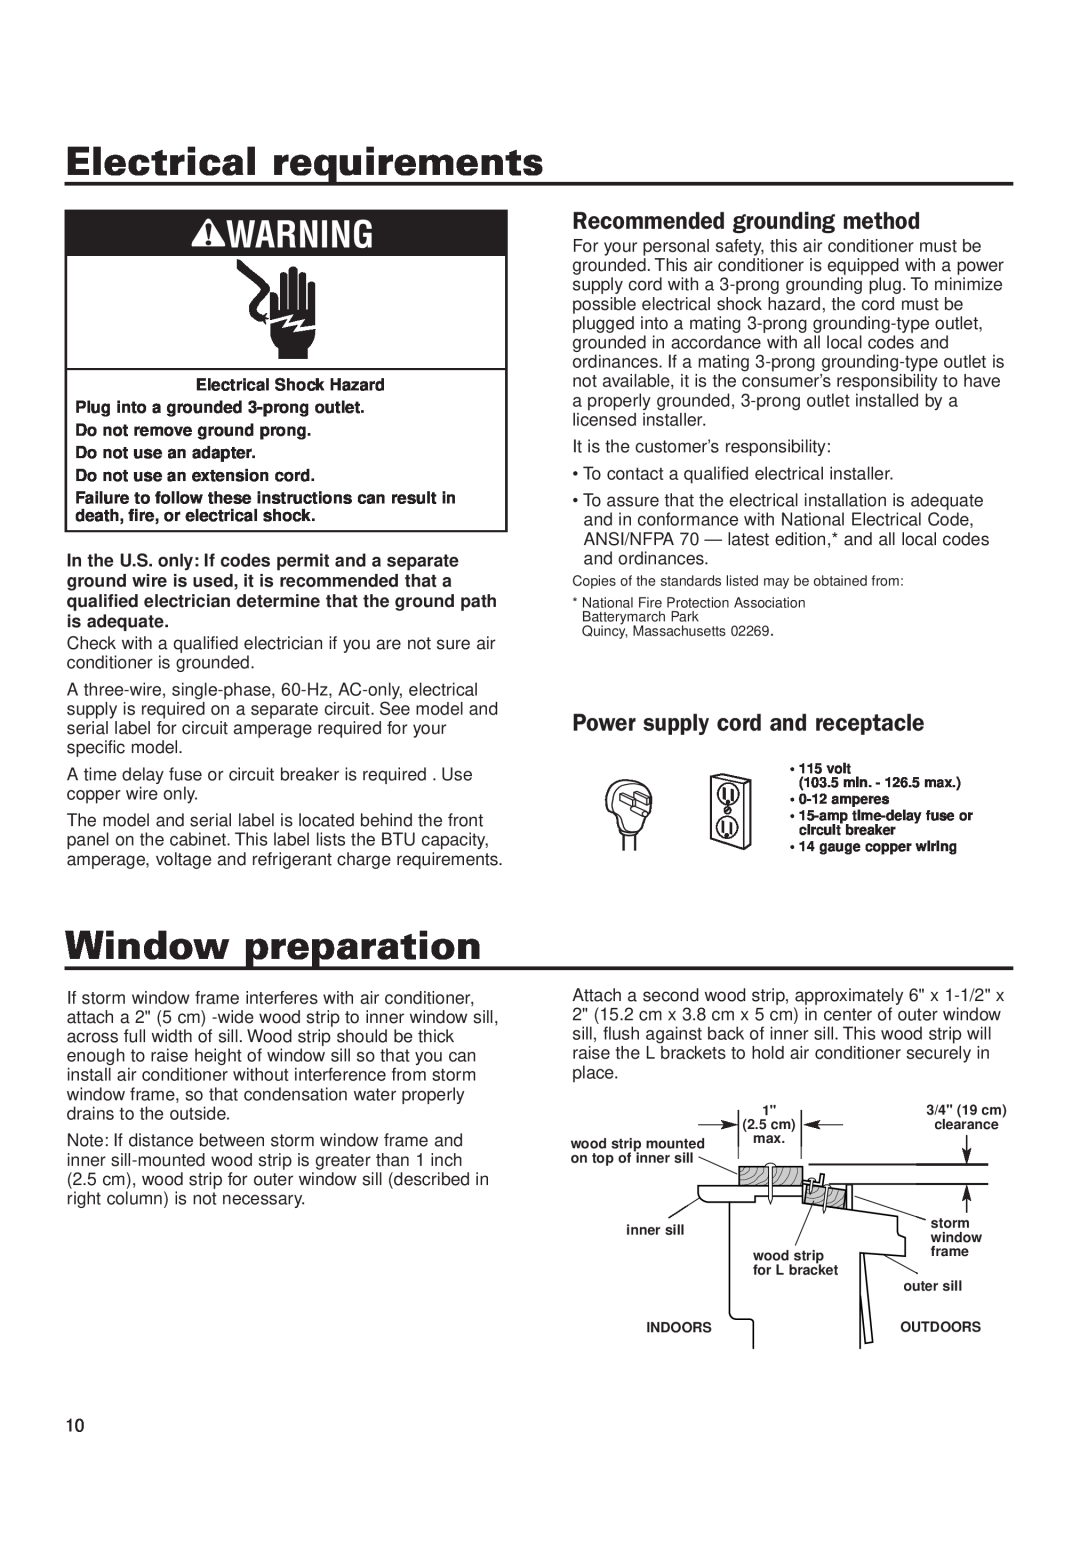 Whirlpool RA51K0, 4380701 Electrical requirements, Window preparation, Recommended grounding method 